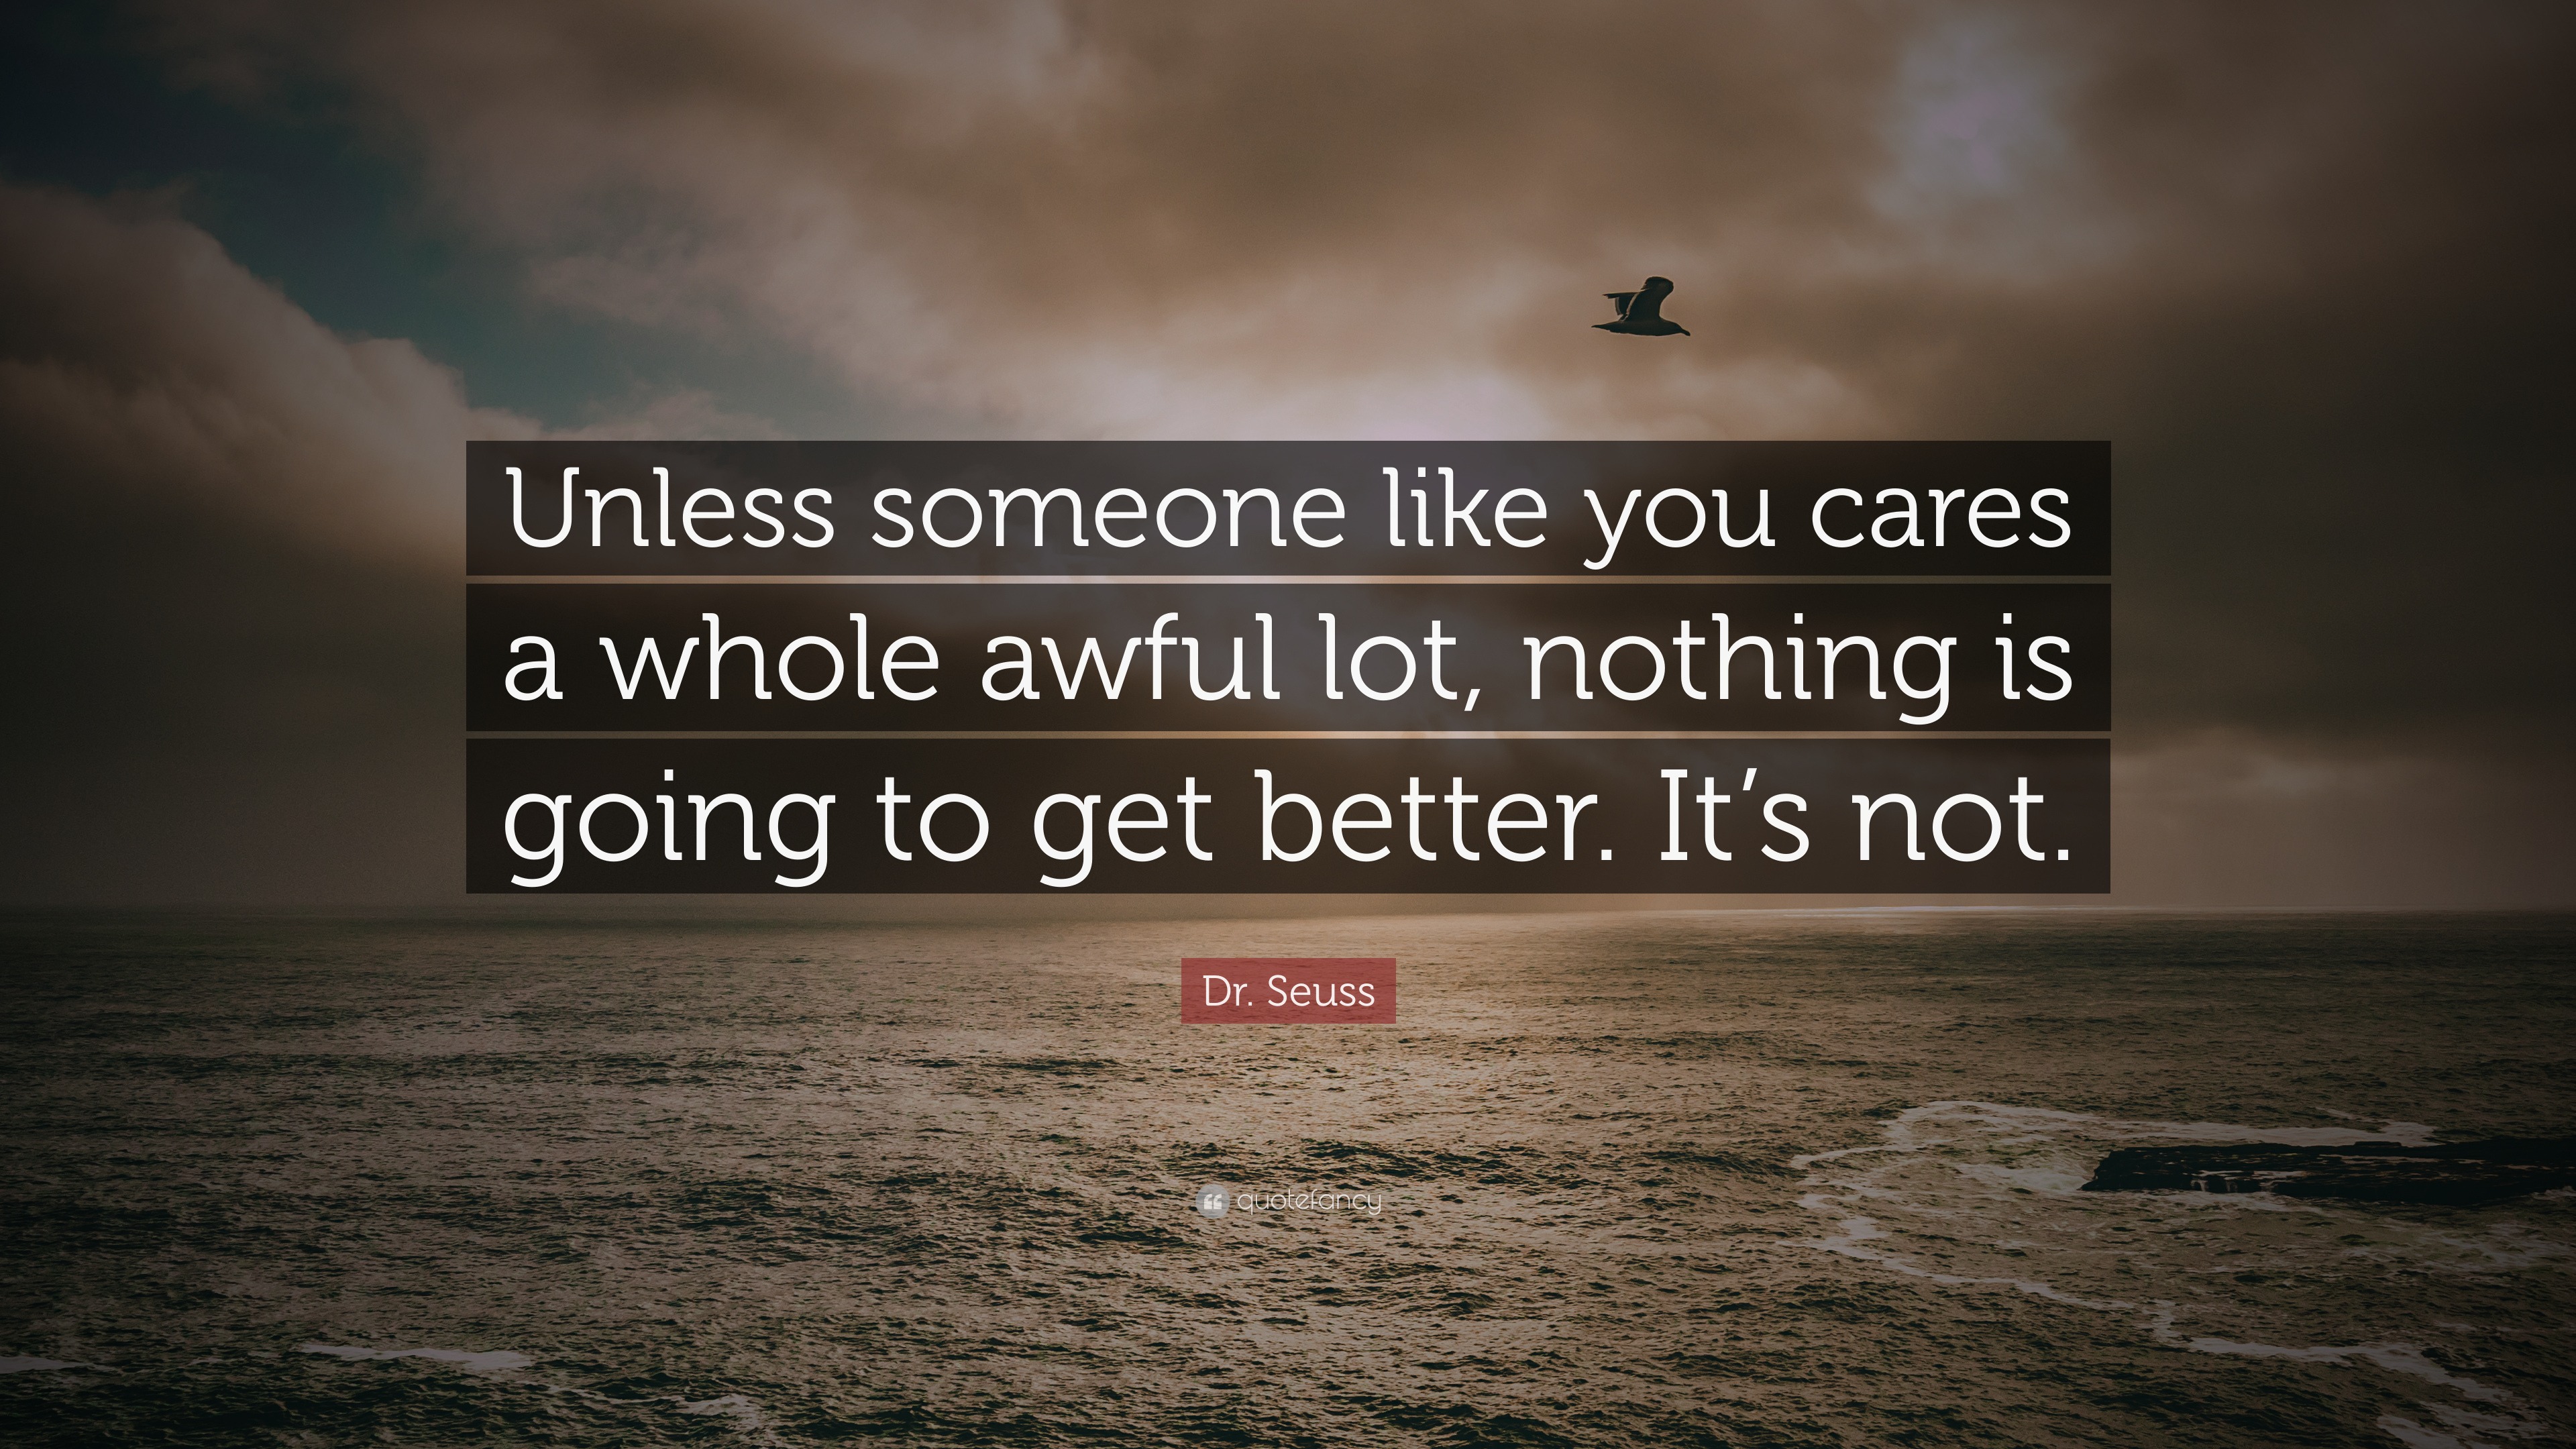 unless someone like you cares a whole awful lot